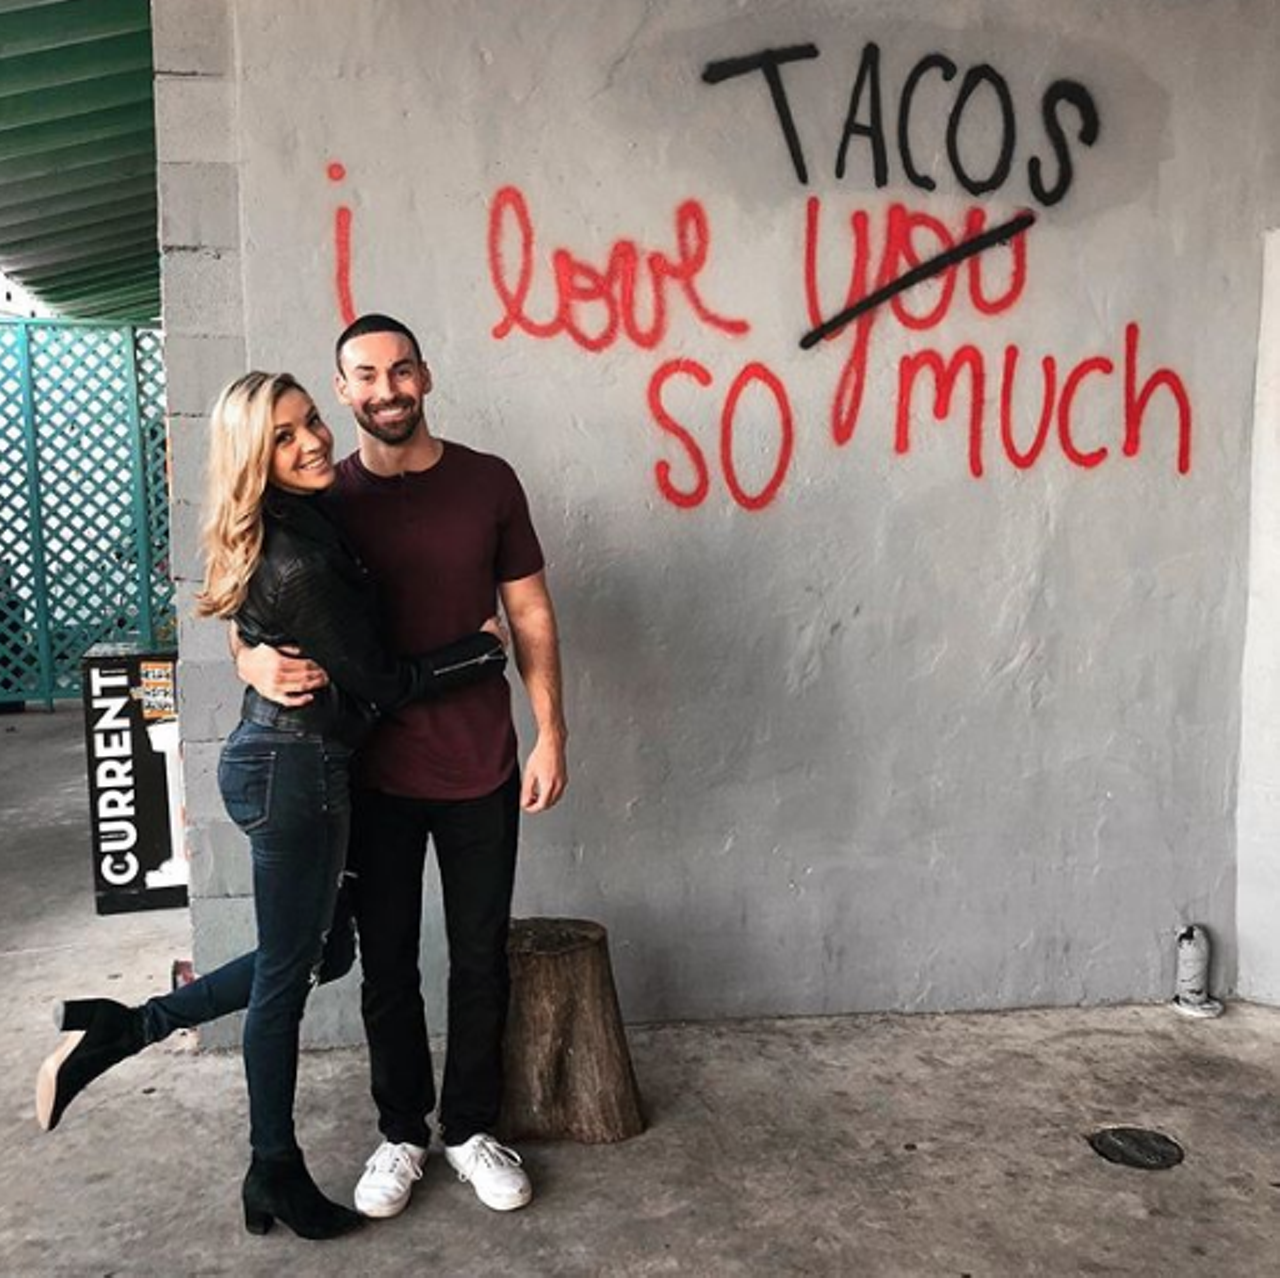 In front of the “I Love Tacos So Much” mural
Because tacos are the foundation of any successful marriage in the Alamo City.
Photo via Instagram / nicole_stelter